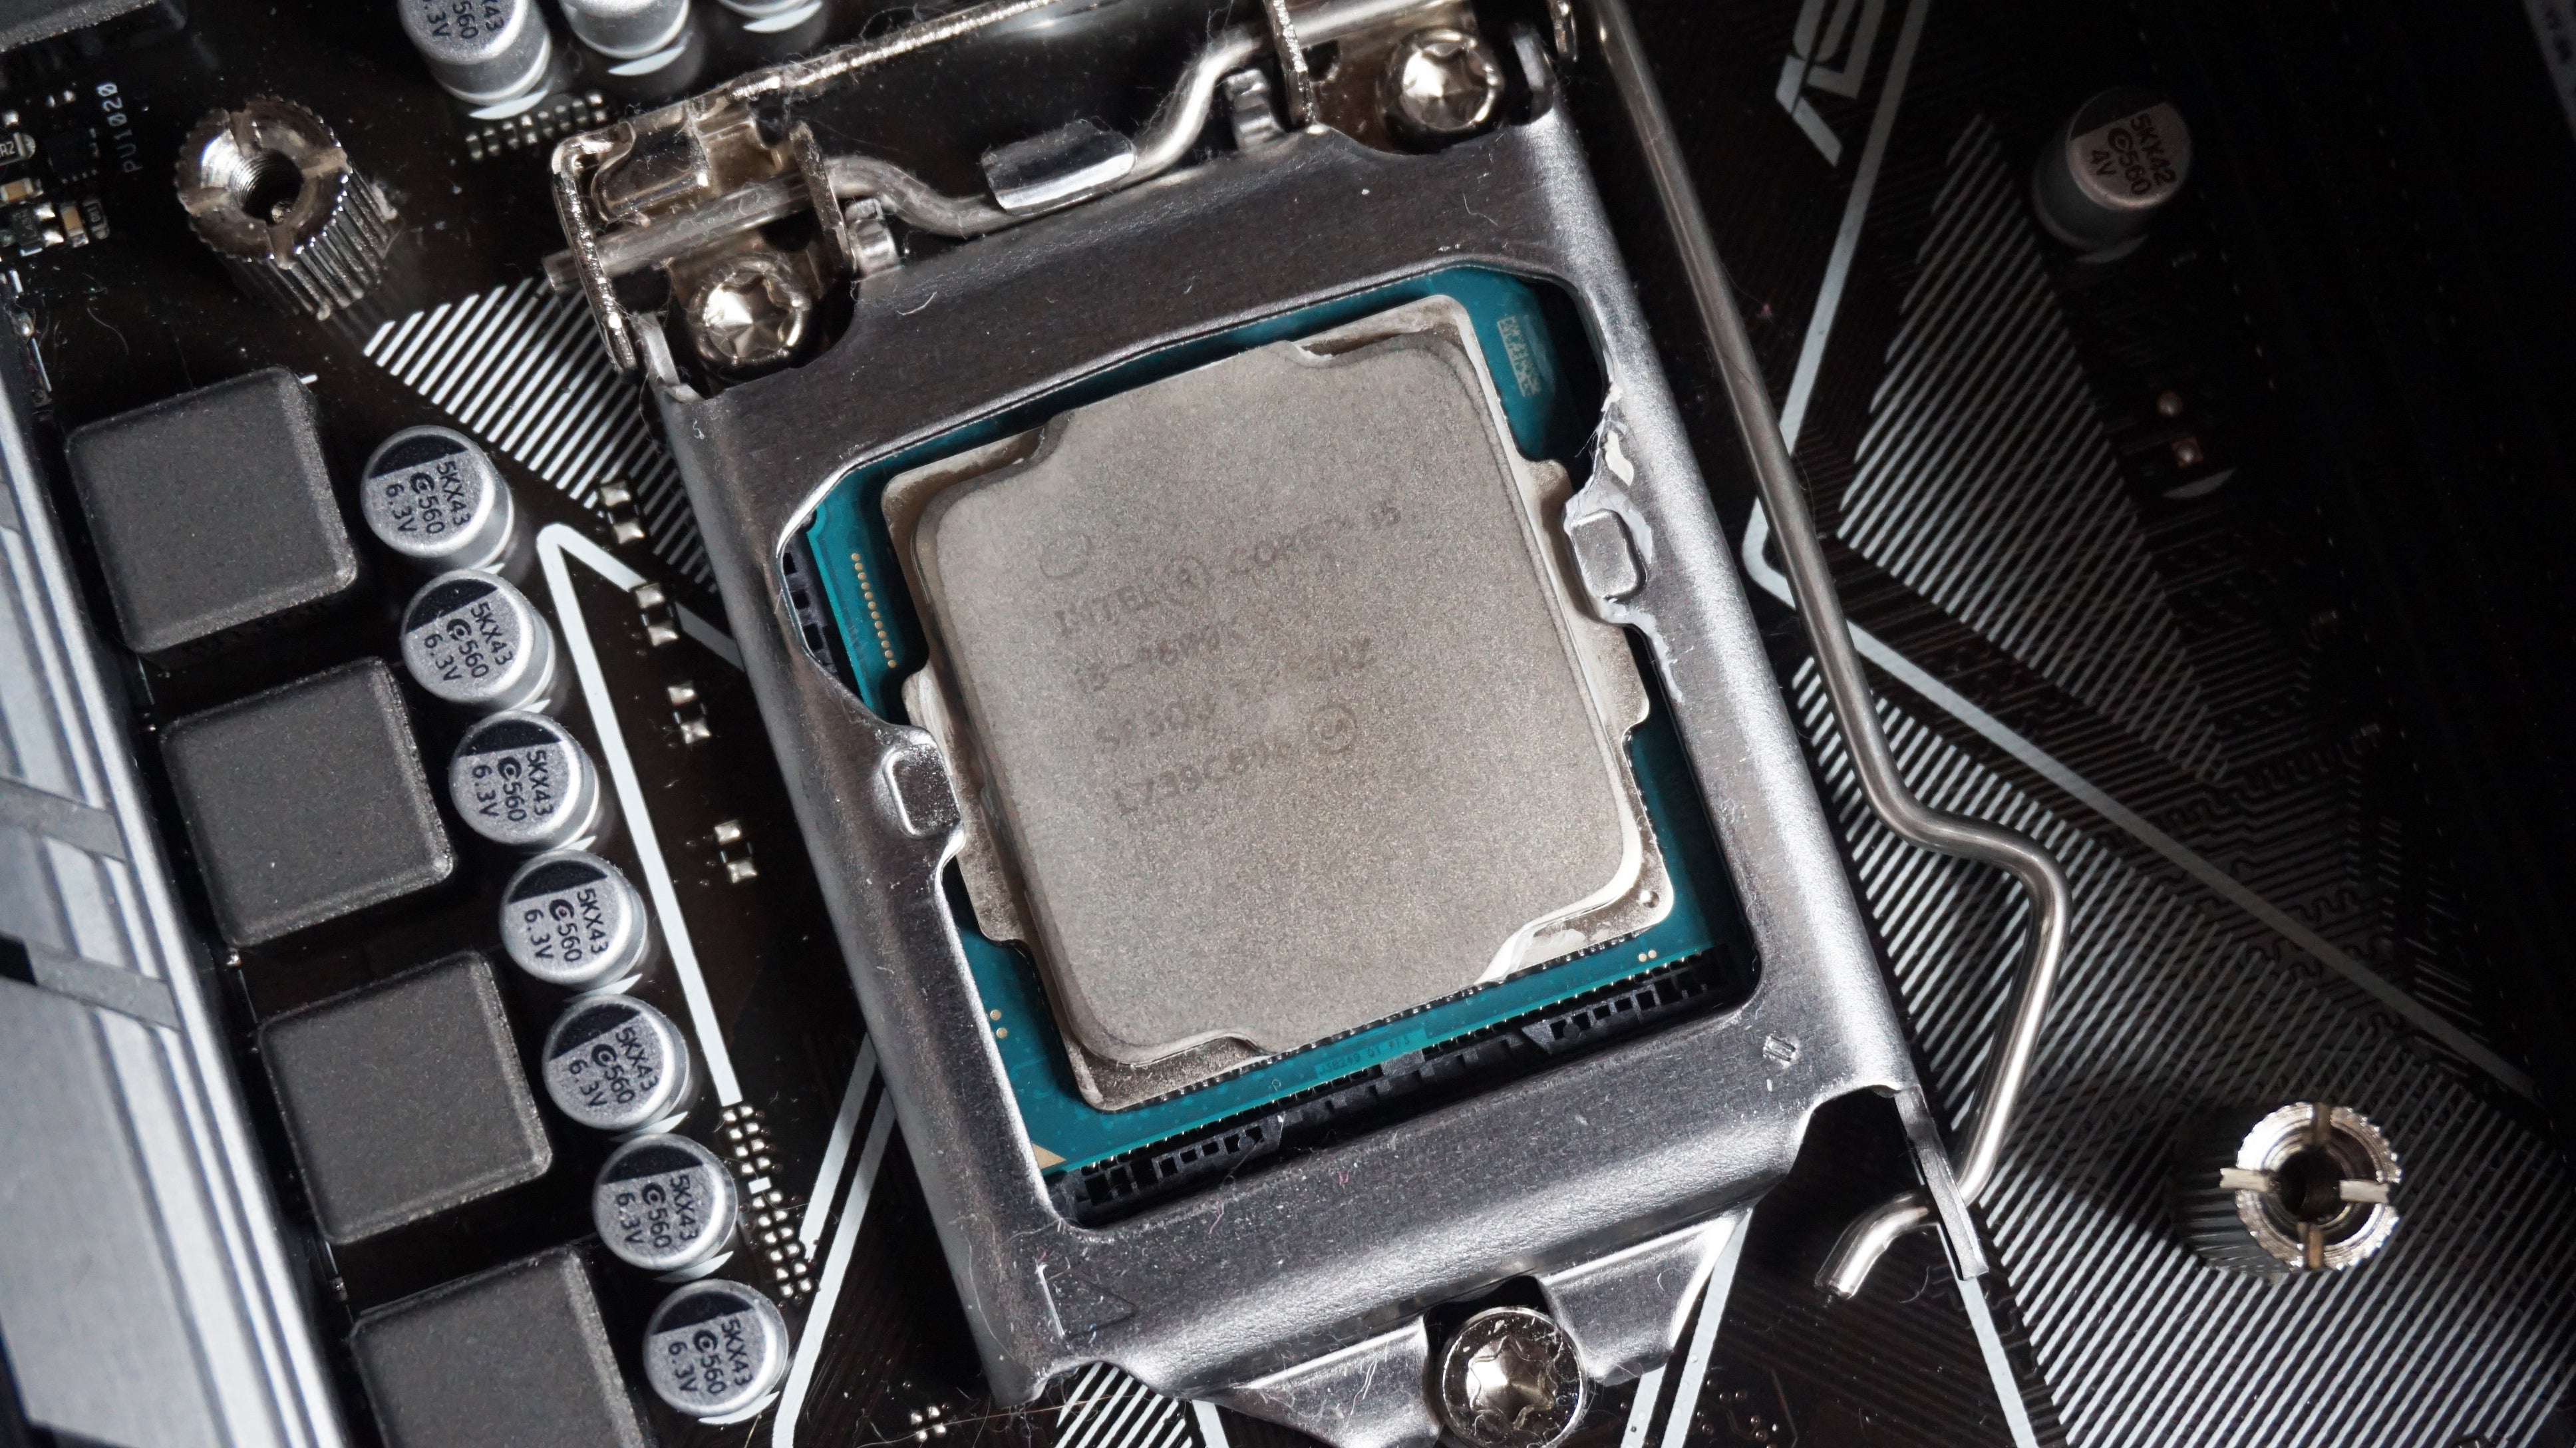 Intel Core i5-8600K review: No longer the best mid-range gaming